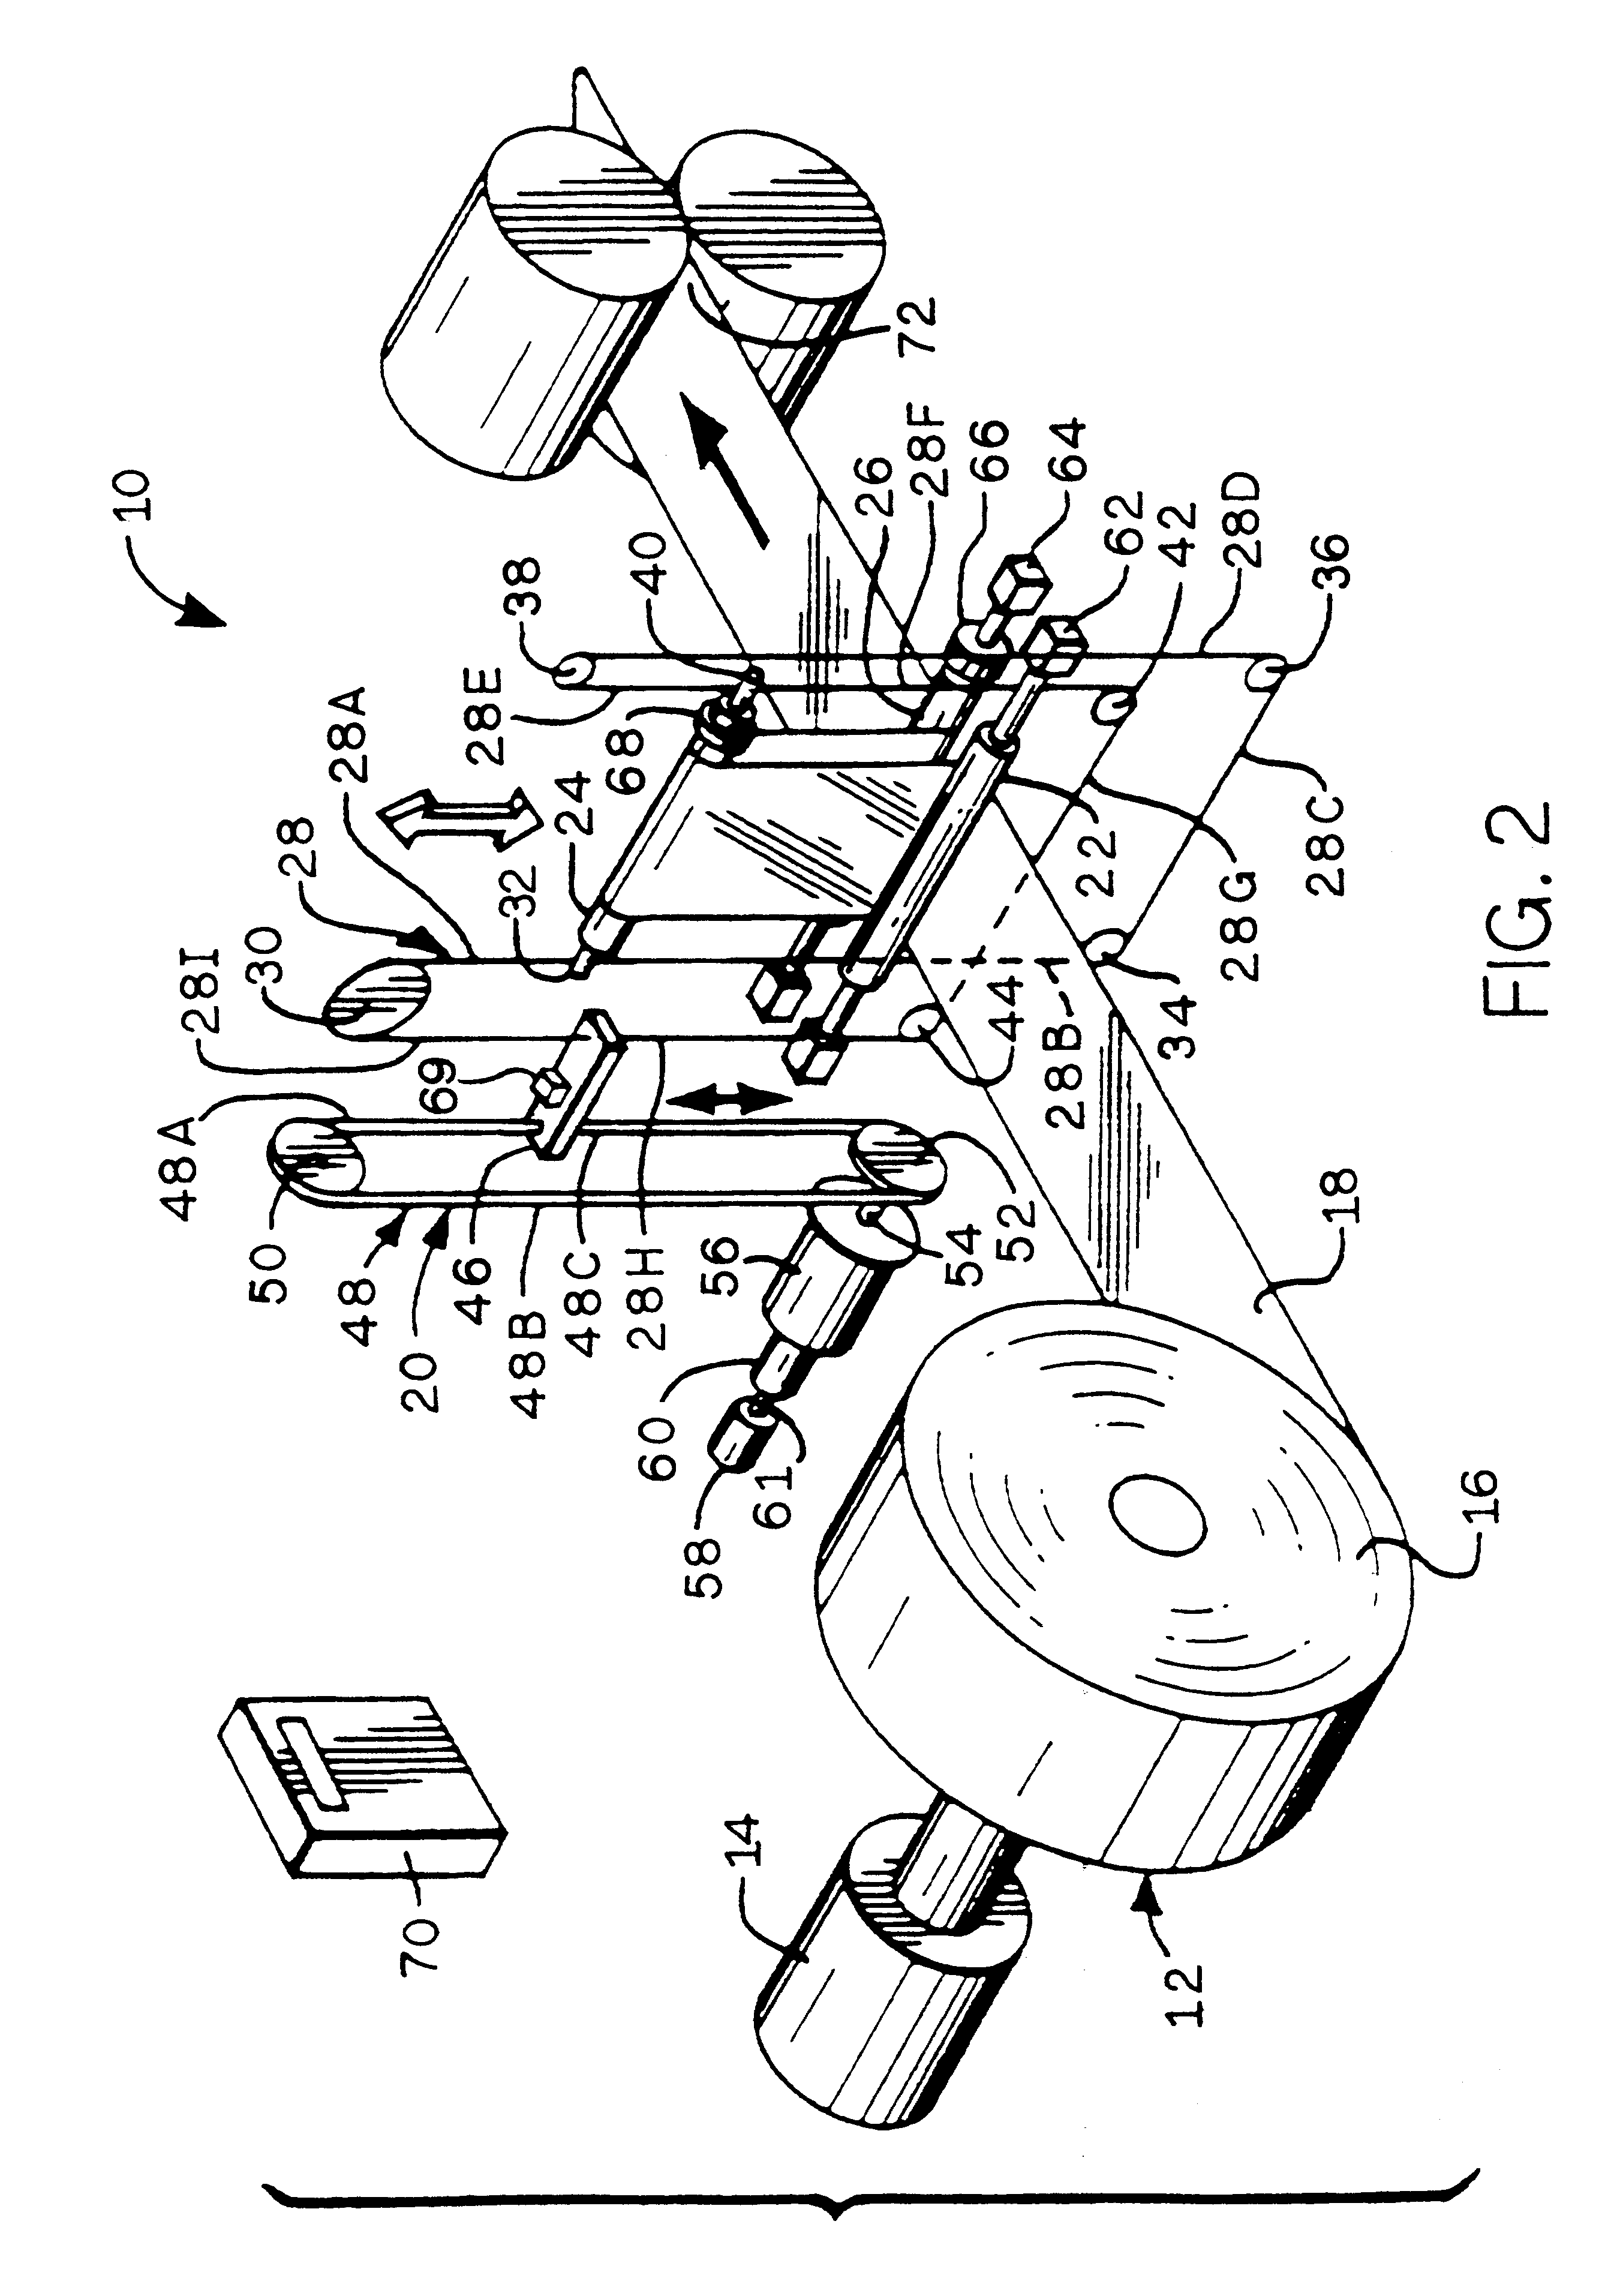 Method and apparatus for controlling web tension by actively controlling velocity and acceleration of a dancer roll